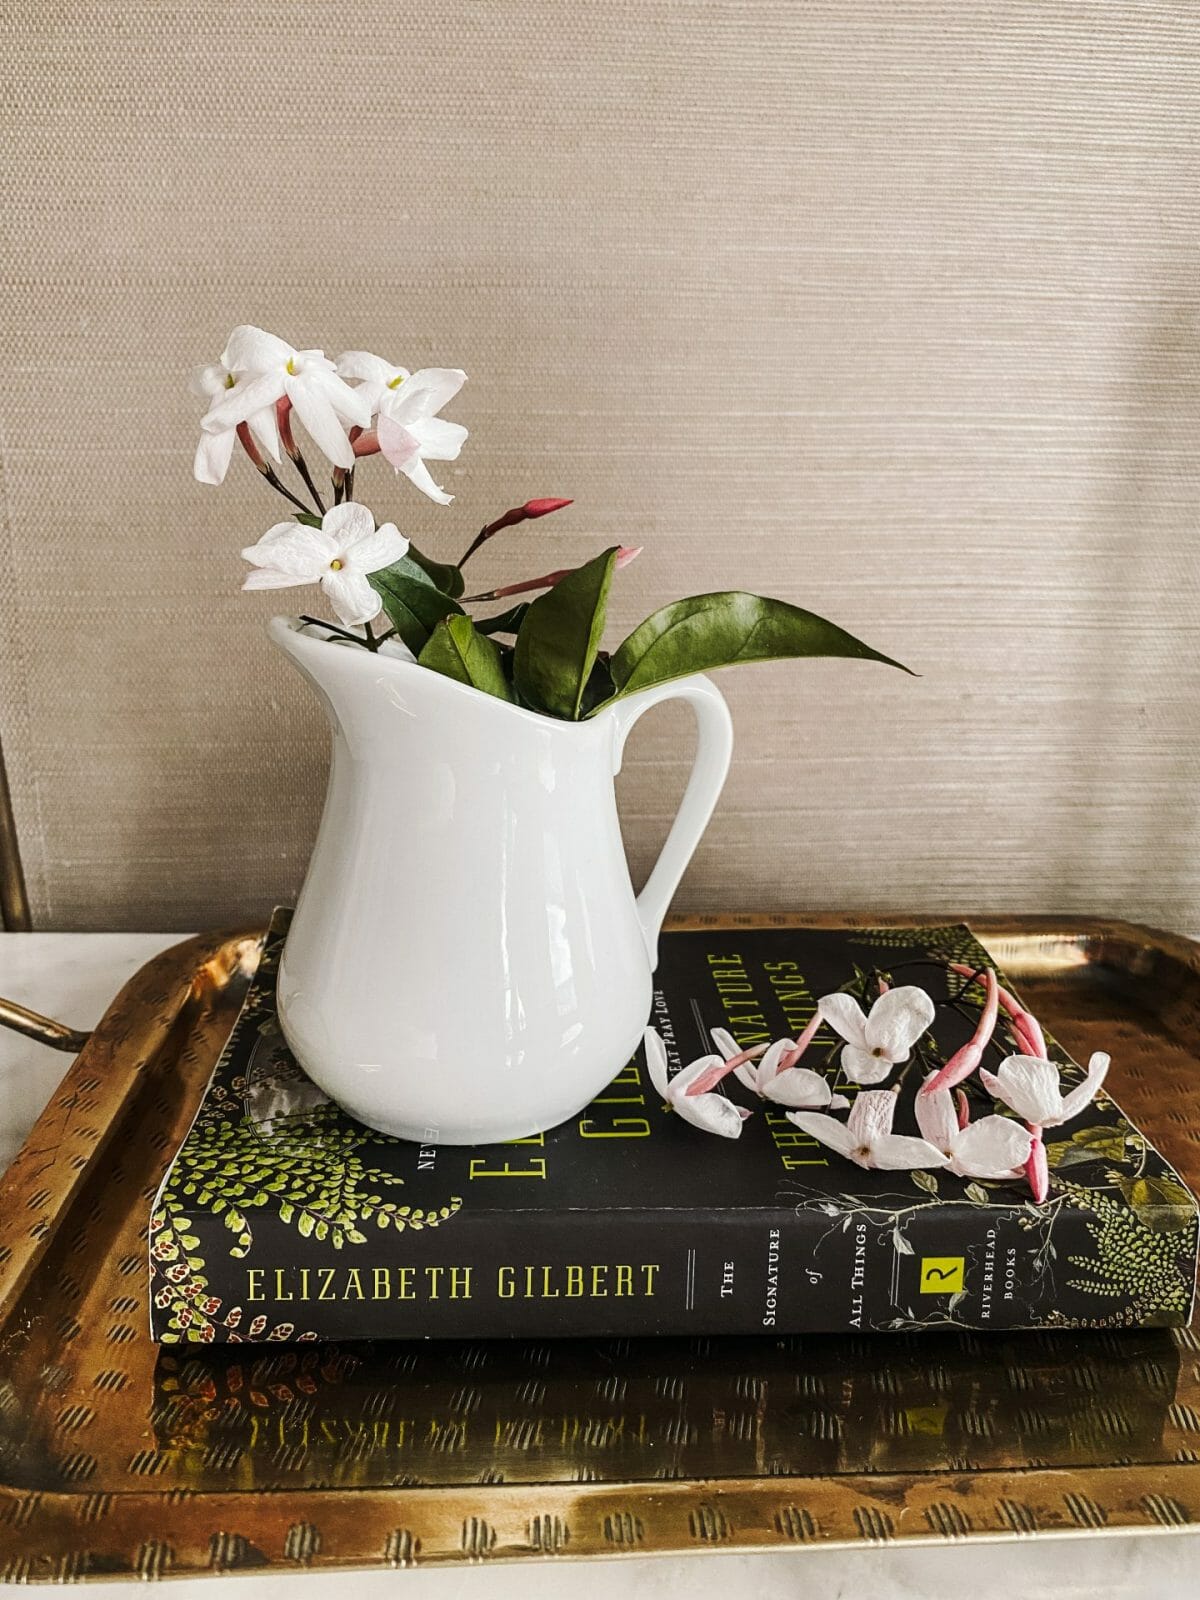 jasmine in a vase on a book